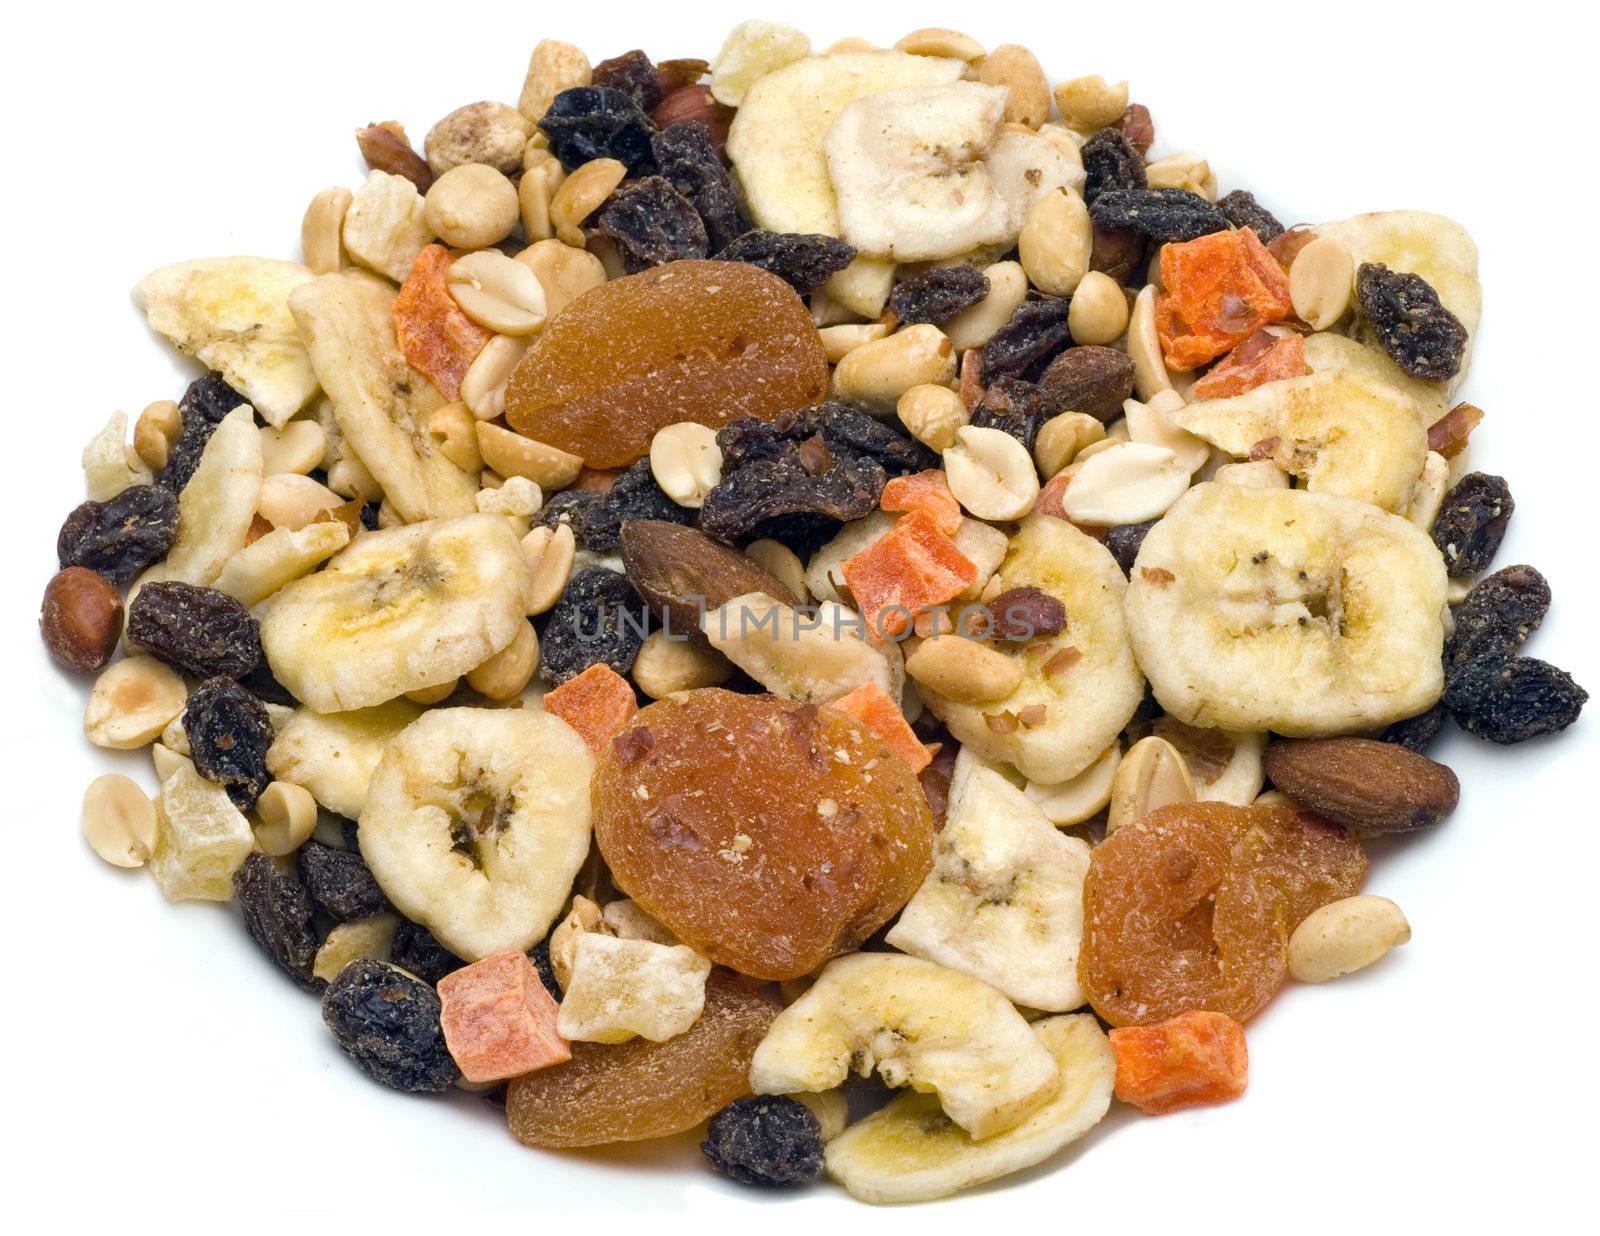 Trail mix a mix of dried fruit, nuts and other healthy foods